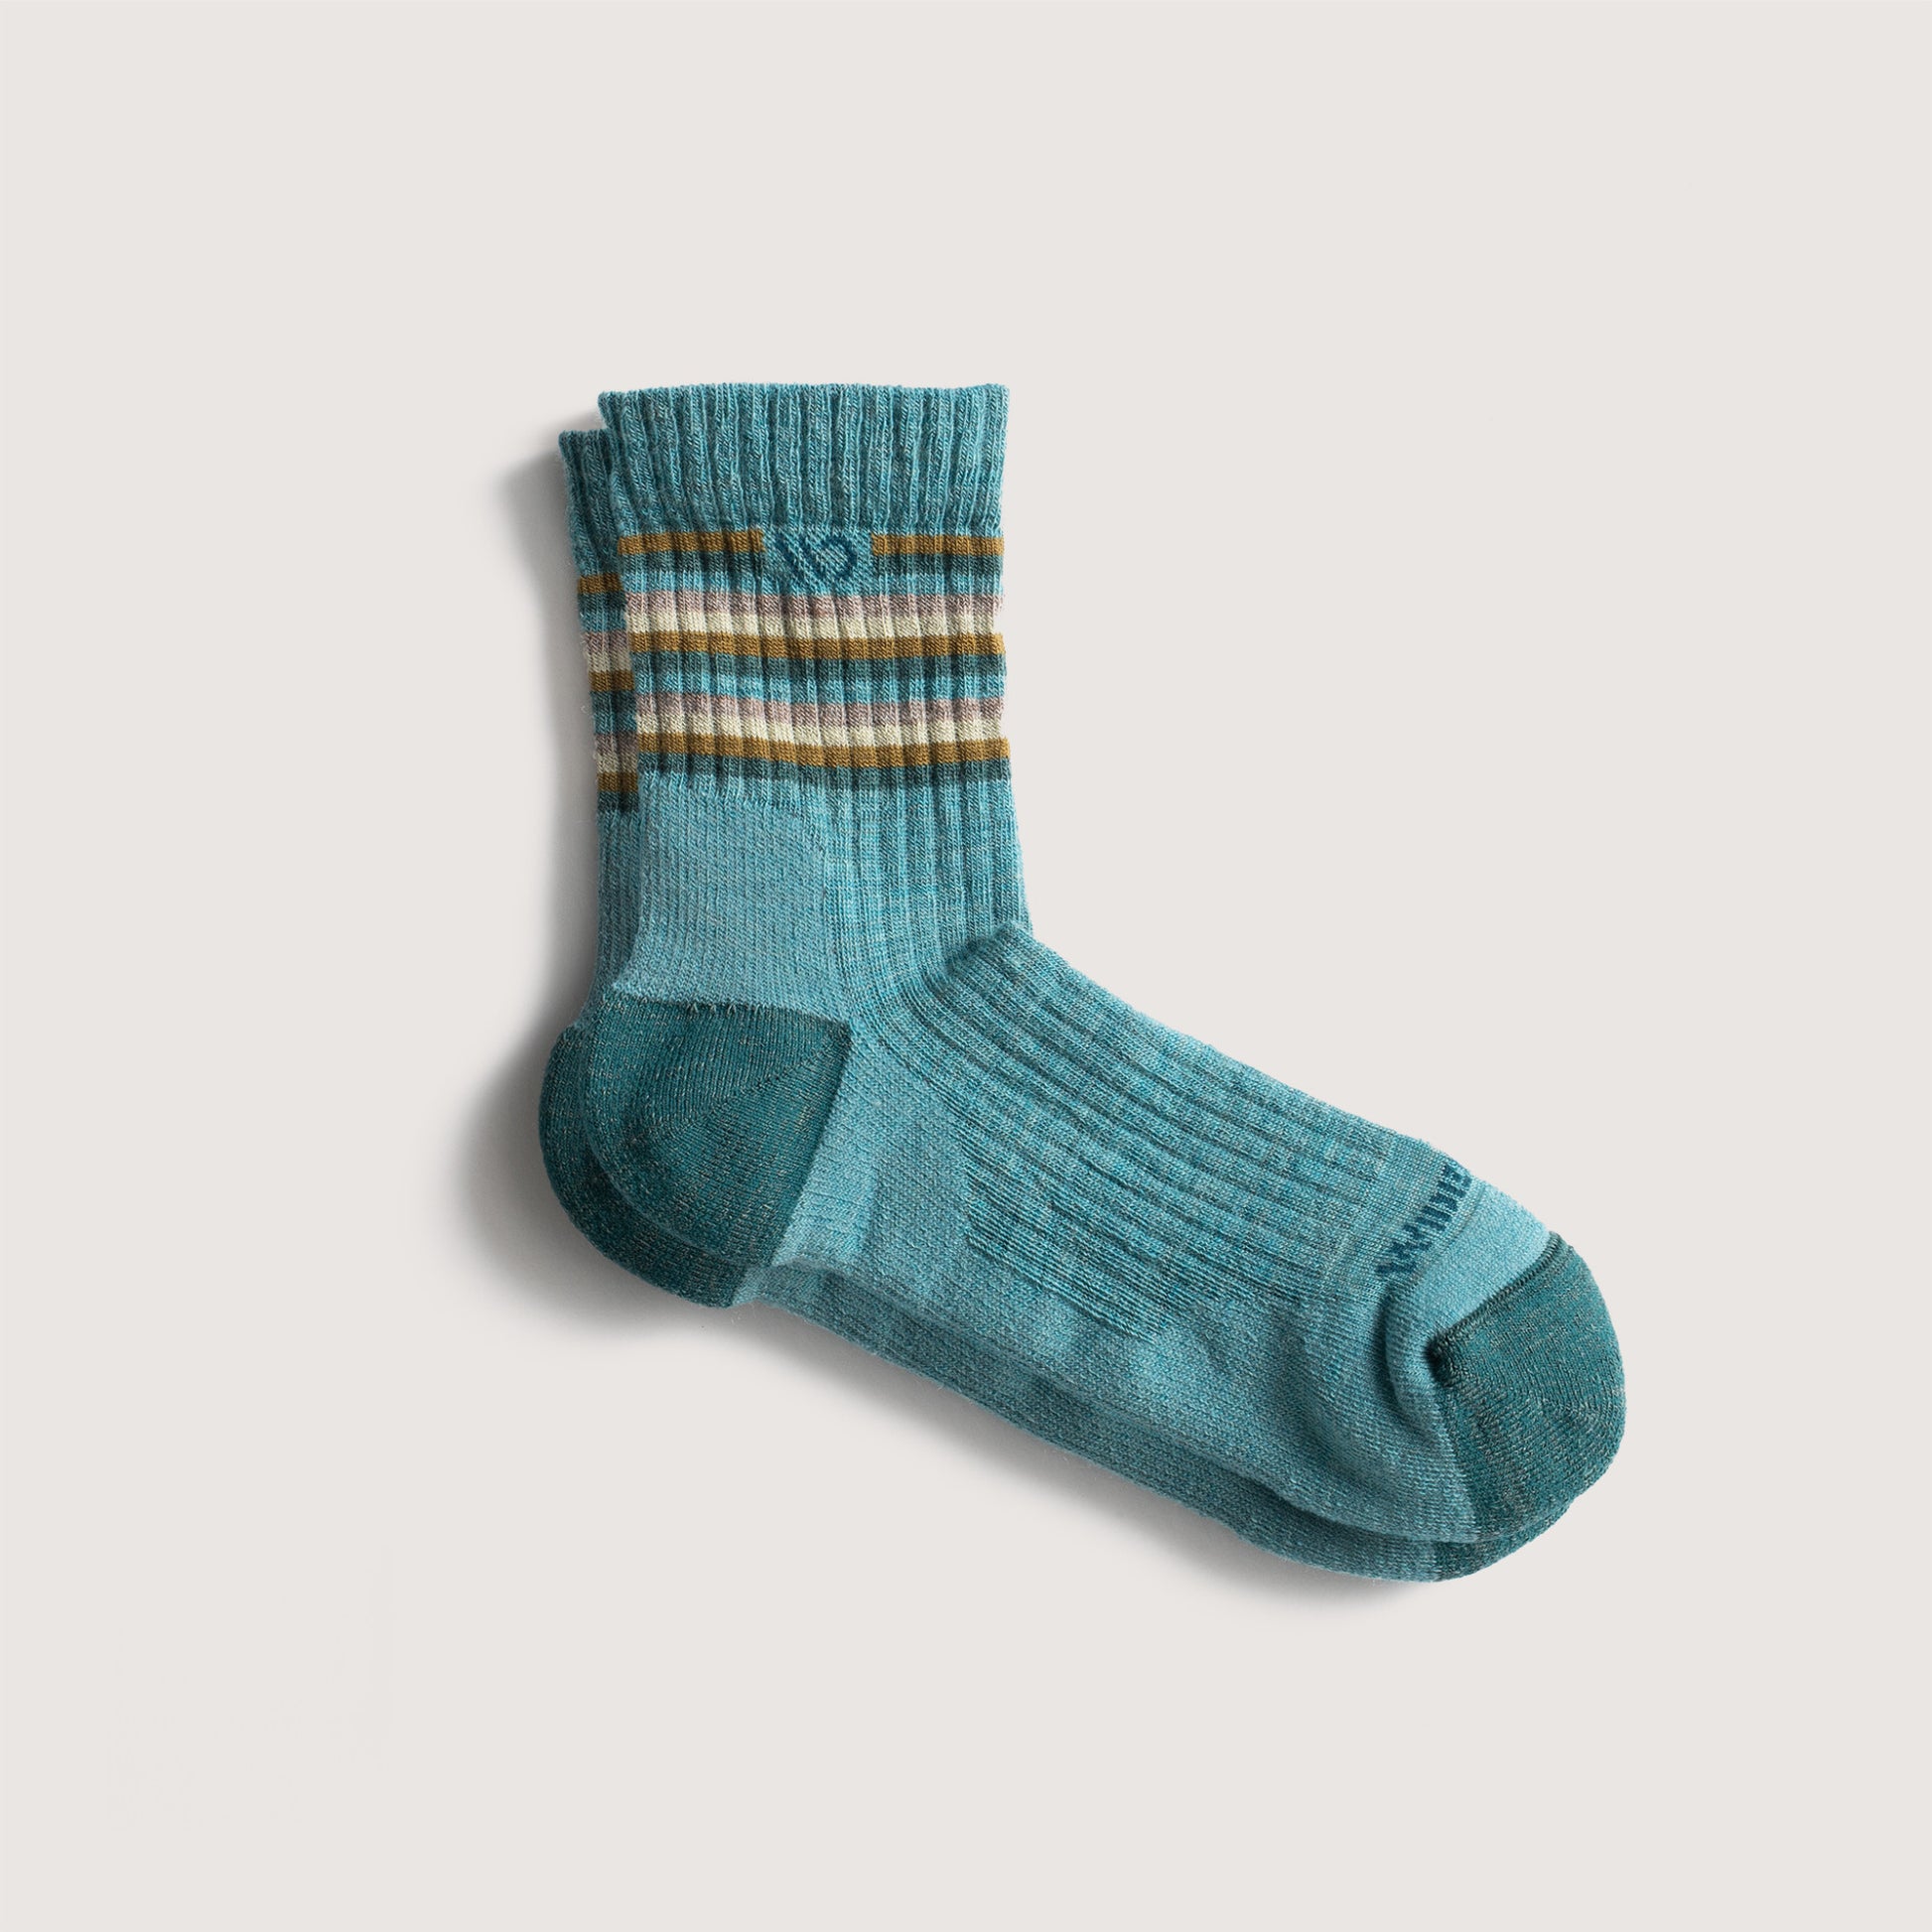 Flat socks dark teal toe and logo, light teal body, and stripes on cuff --Light Teal